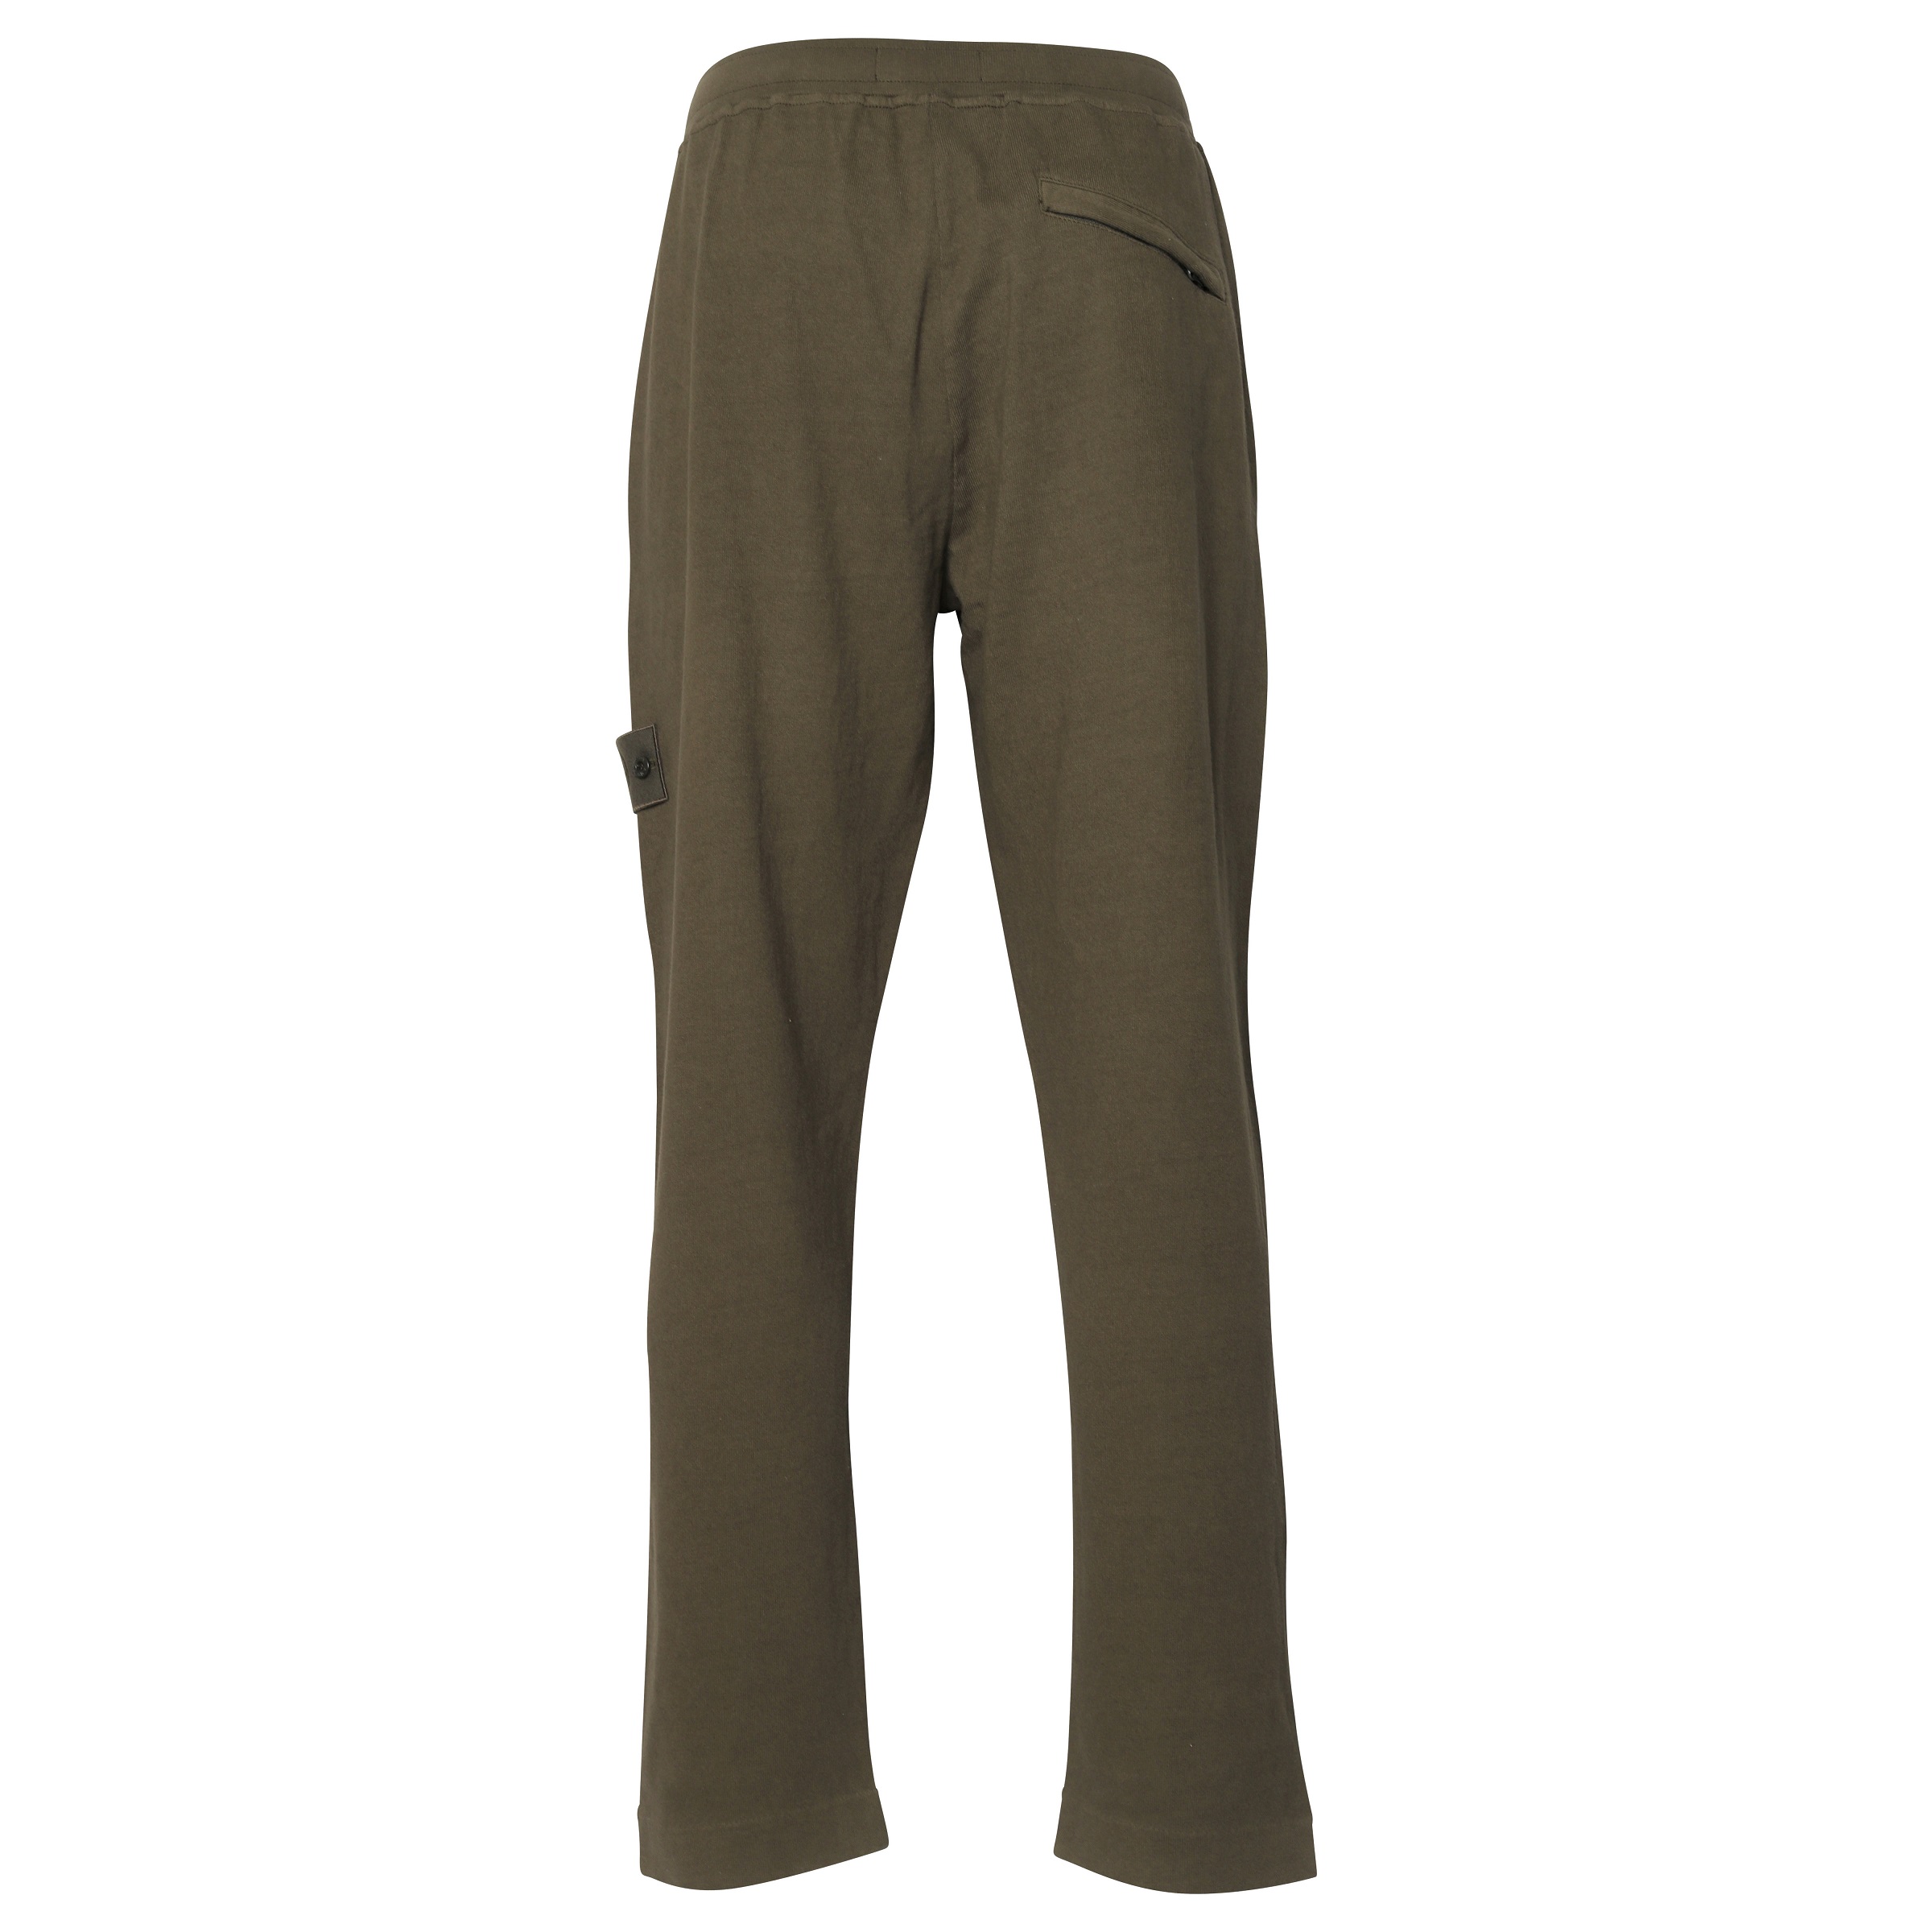 Stone Island Ghost Light Sweatpant in Military Green S